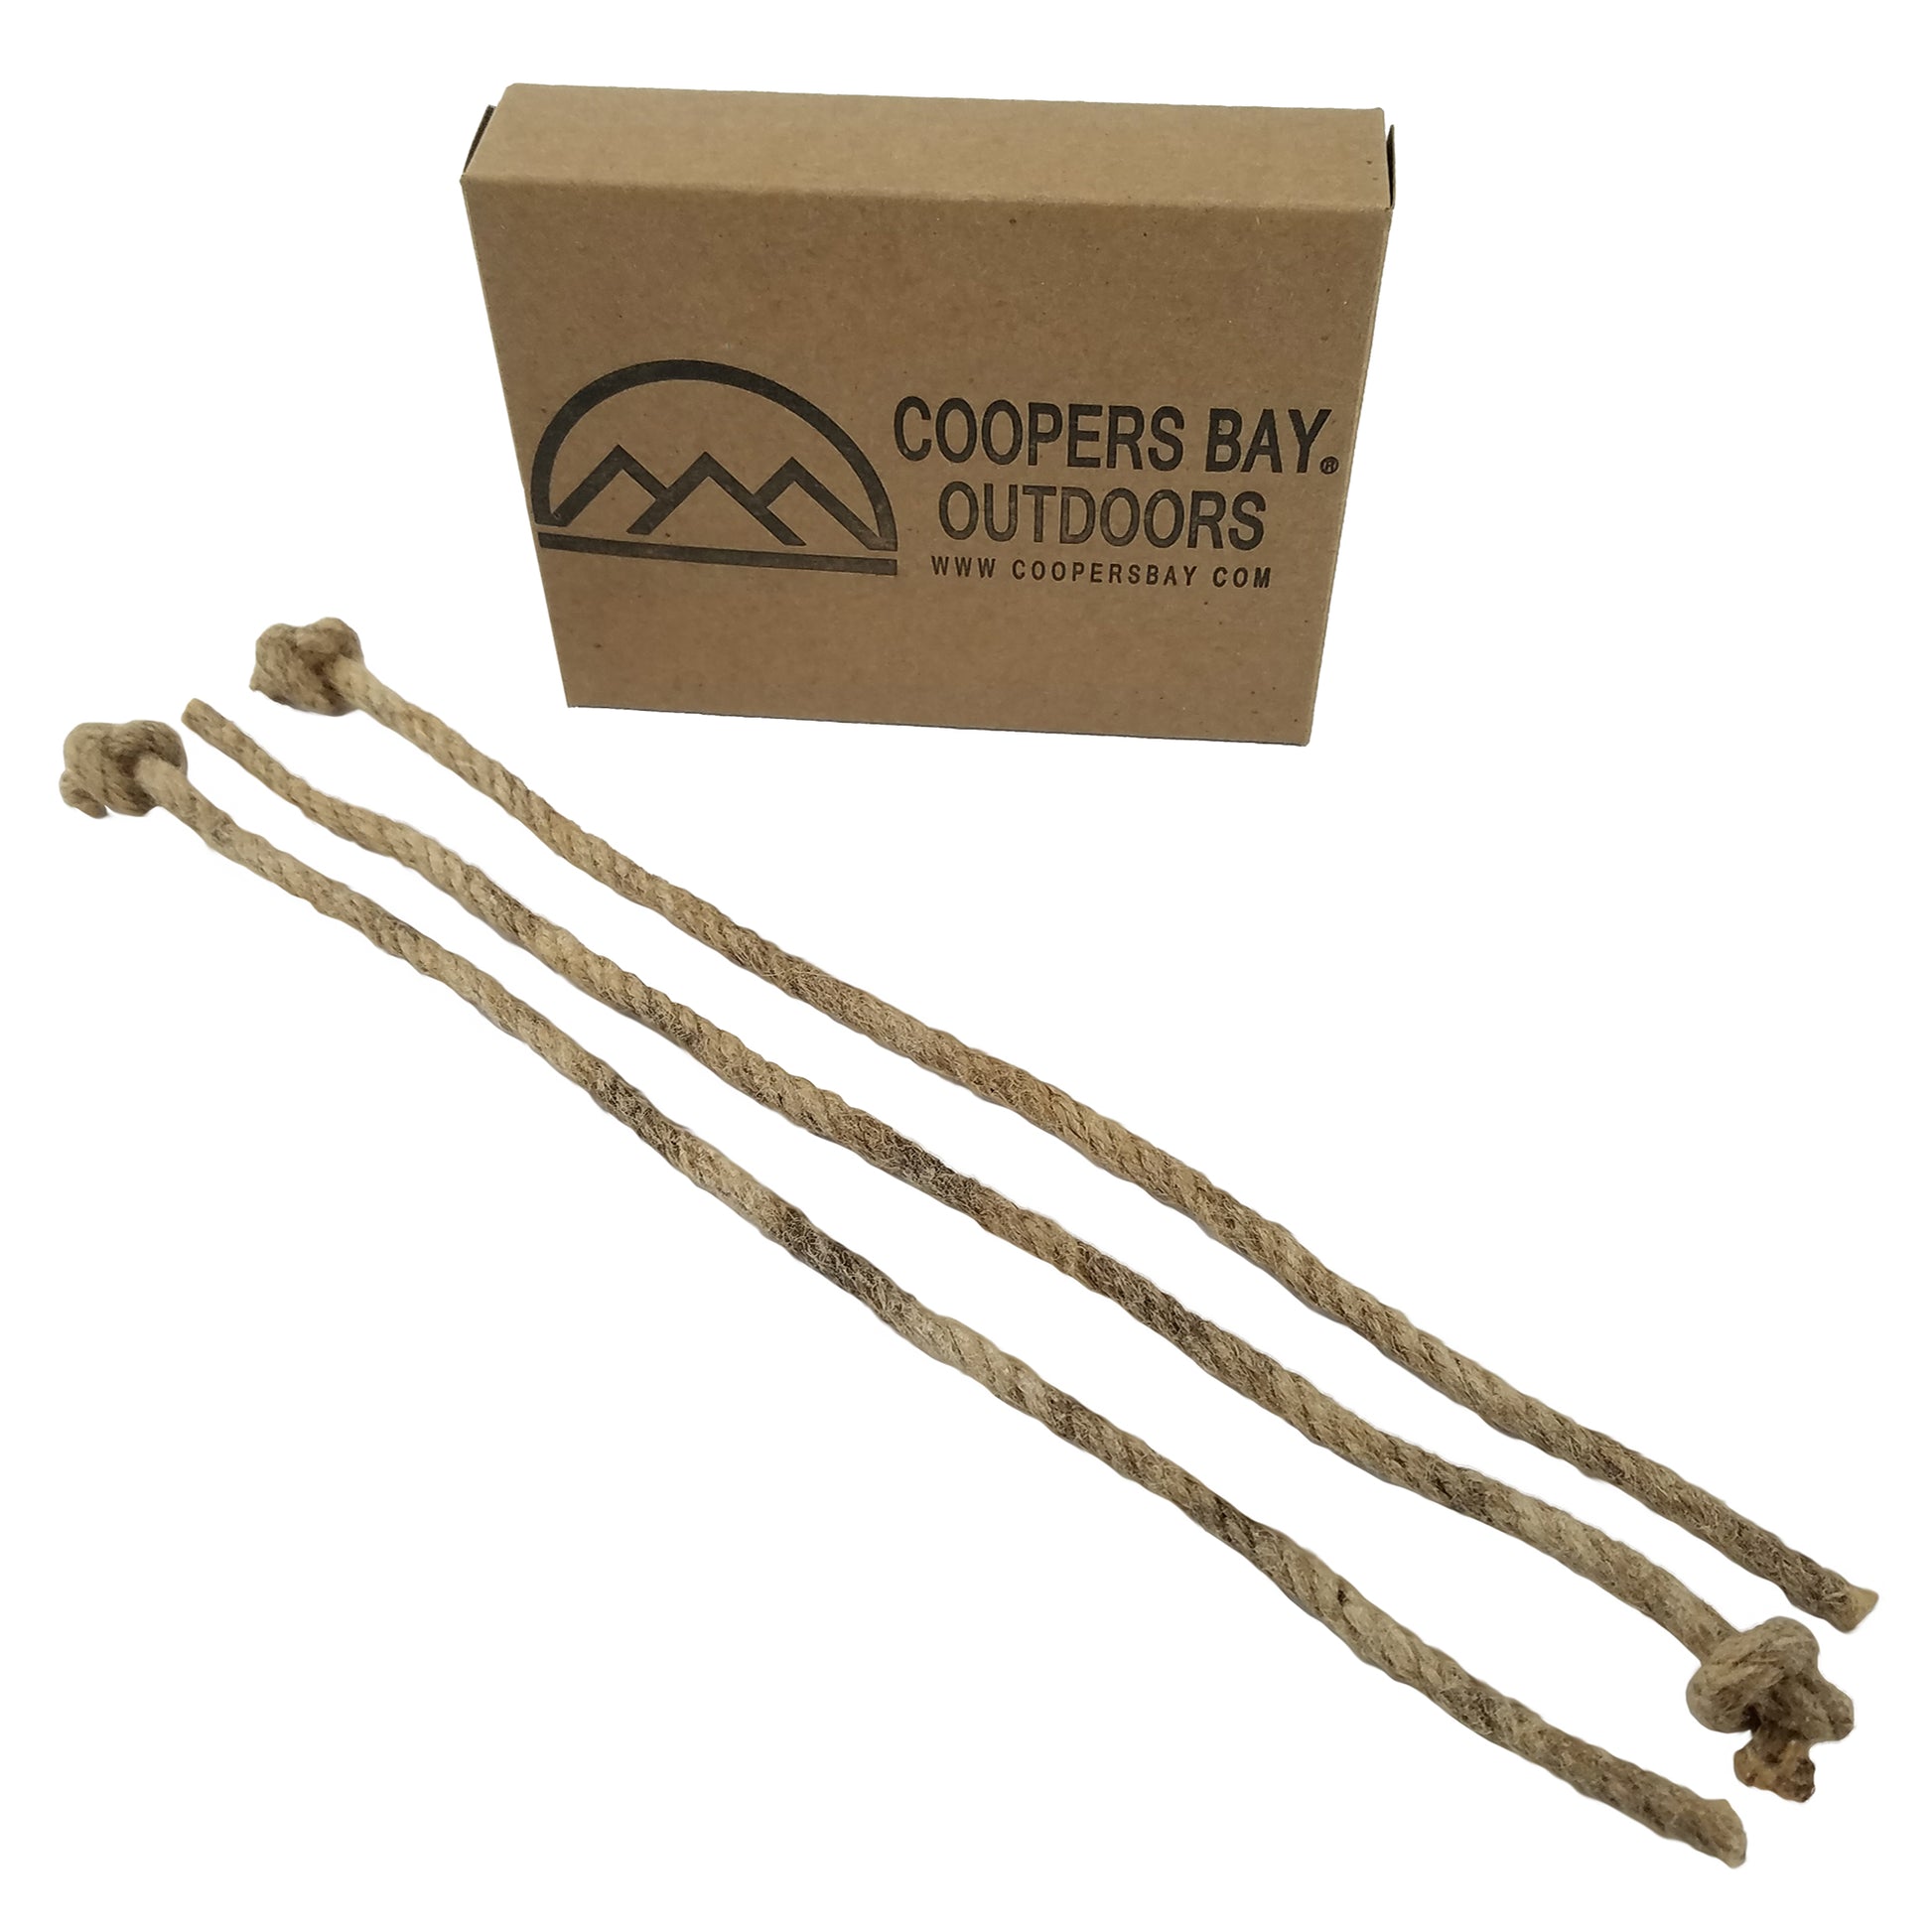 Coopers Bay FireWick Torch - Reusable Fire Starting Tinder - Bushcraft Replacement Wicks - 3 Pack